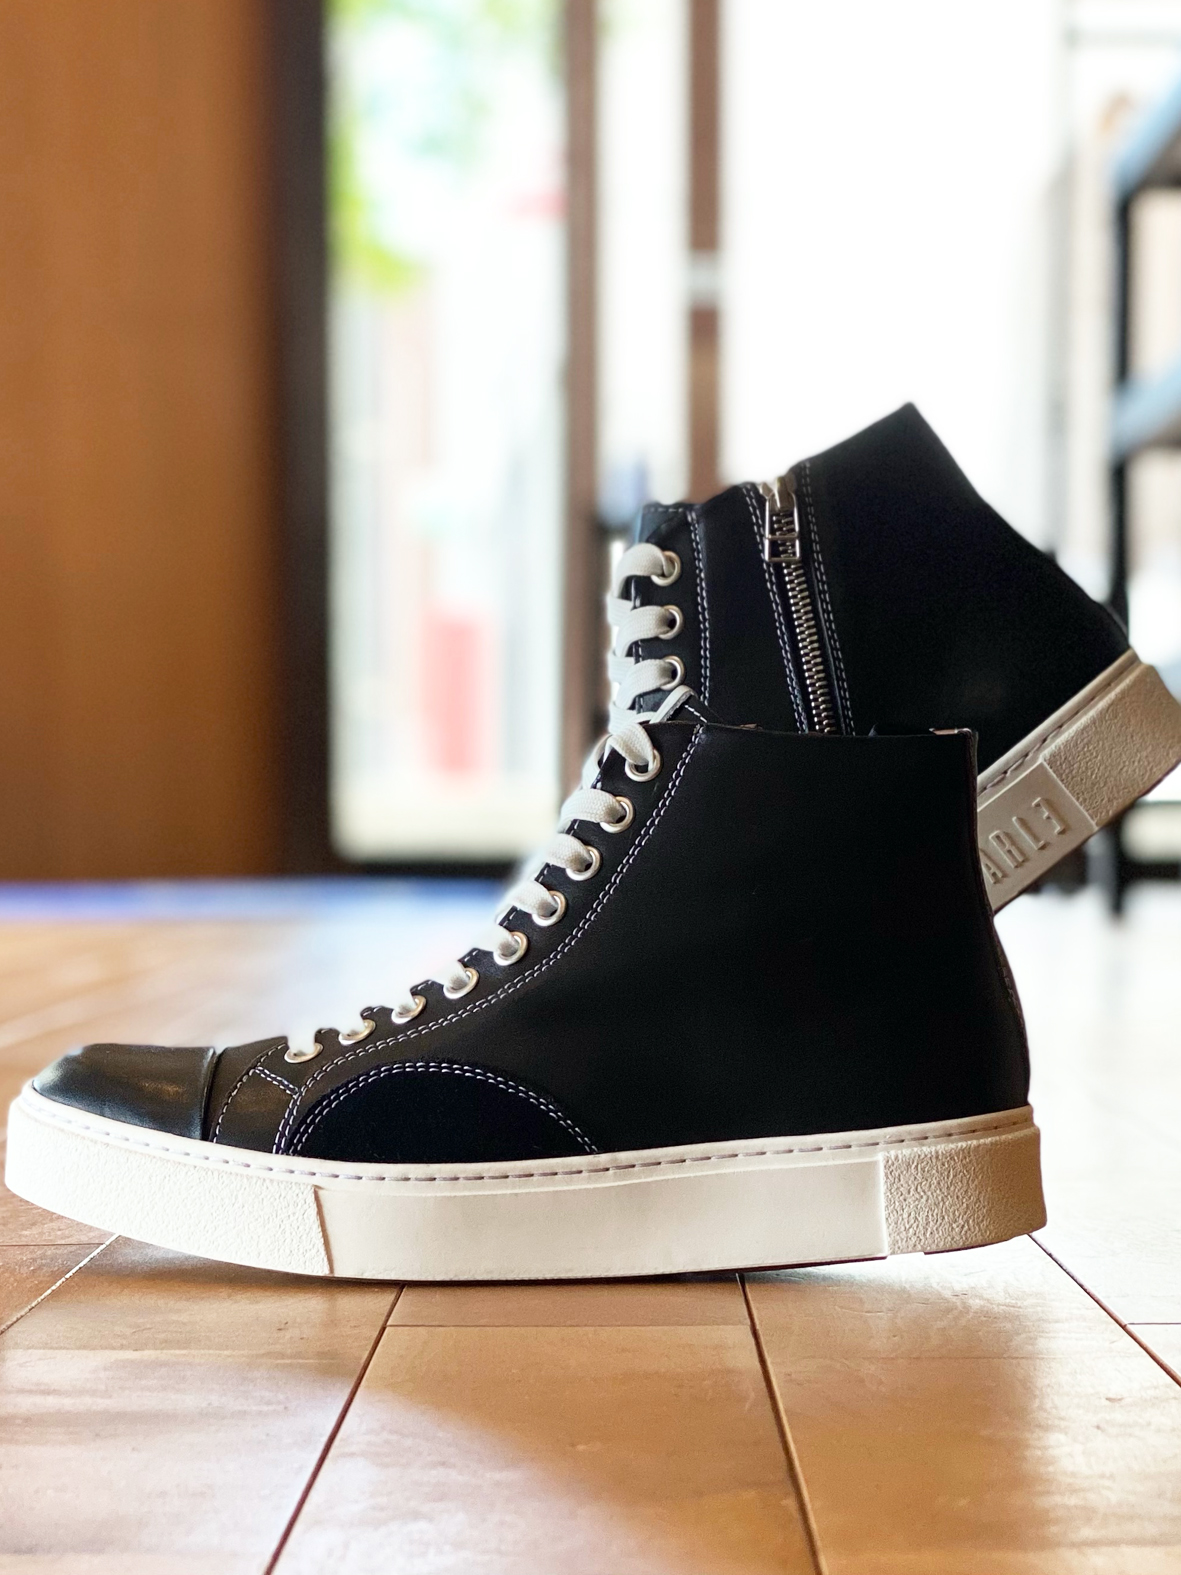 EARLE (アール) | CLASSIC LACE UP SNEAKERS